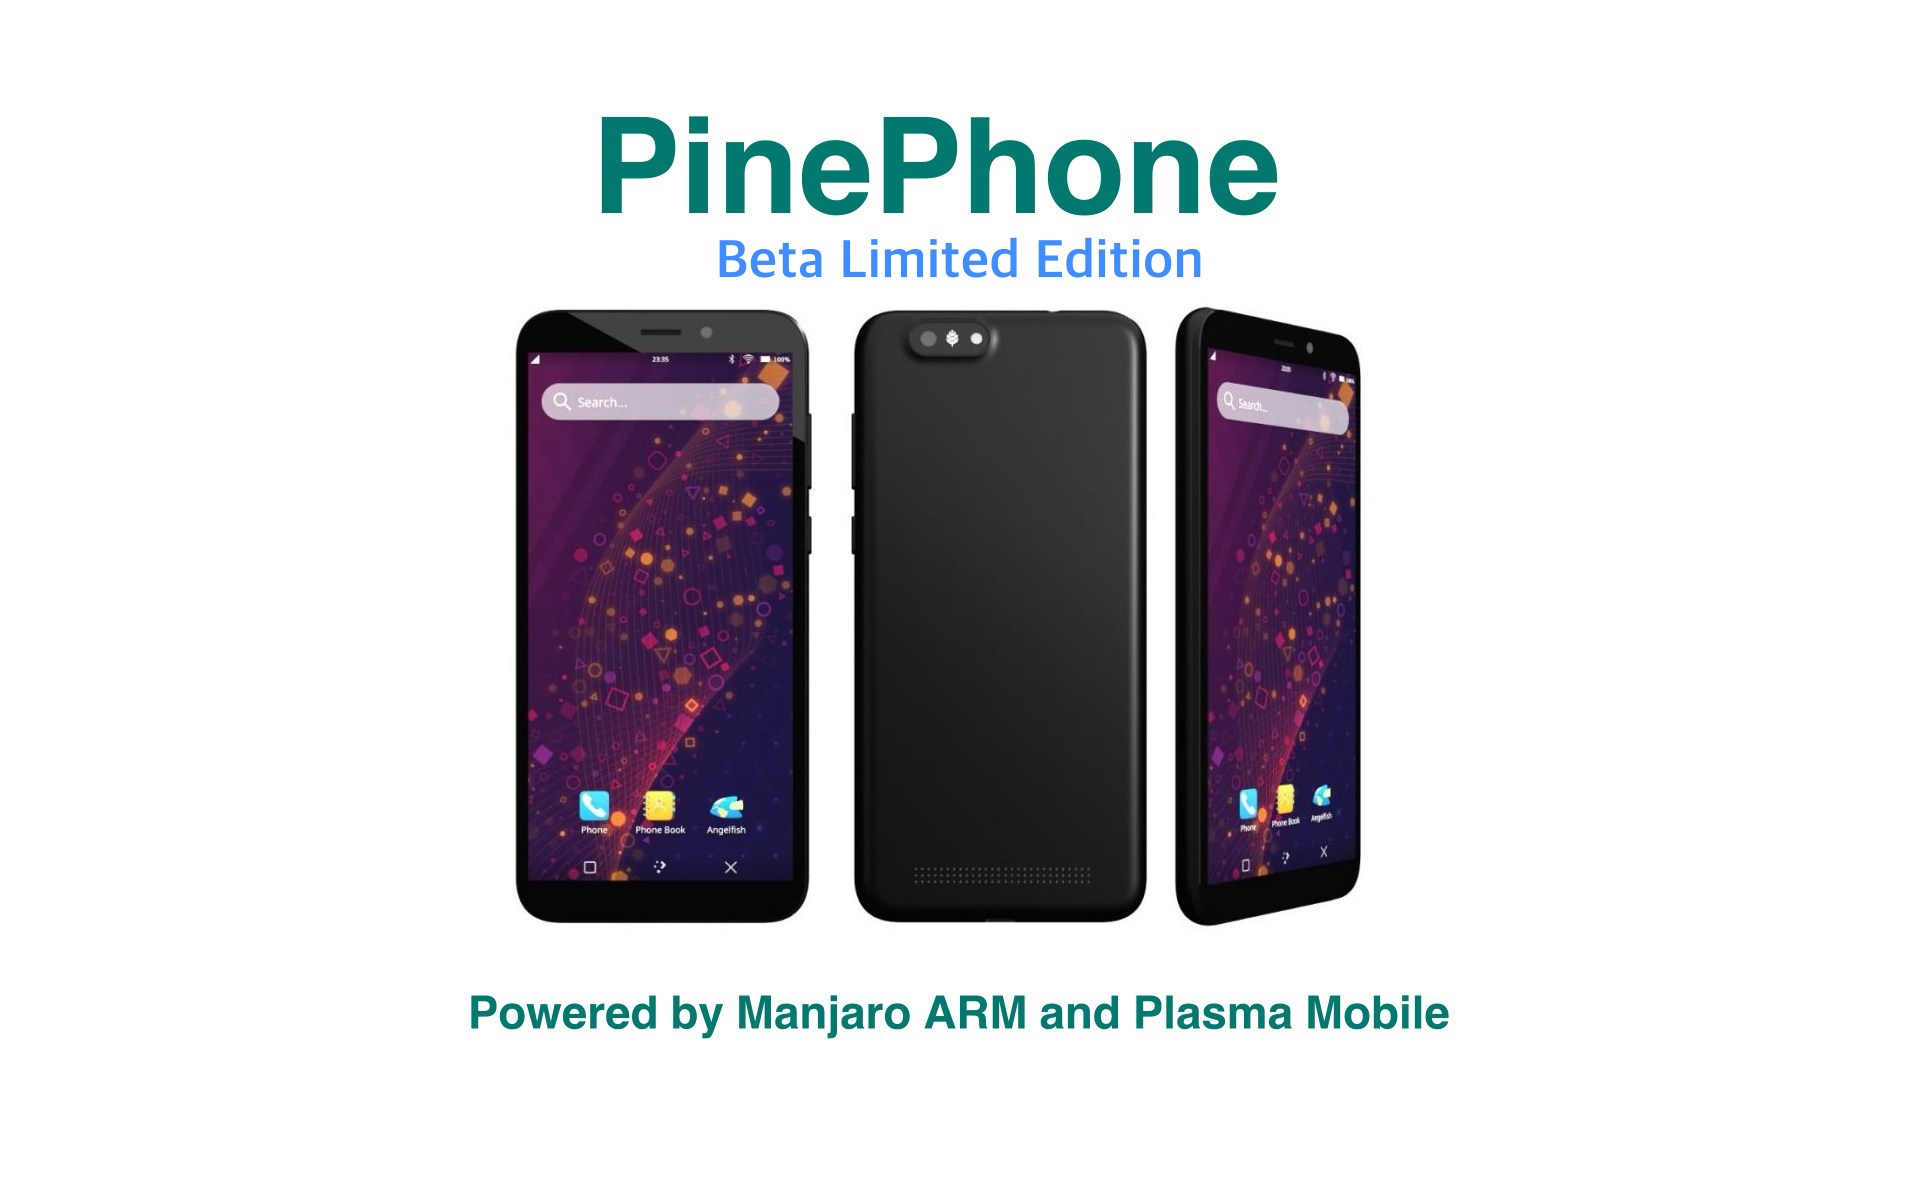 PinePhone Beta Limited Edition Is Now Available for Pre-Order with Manjaro Linux